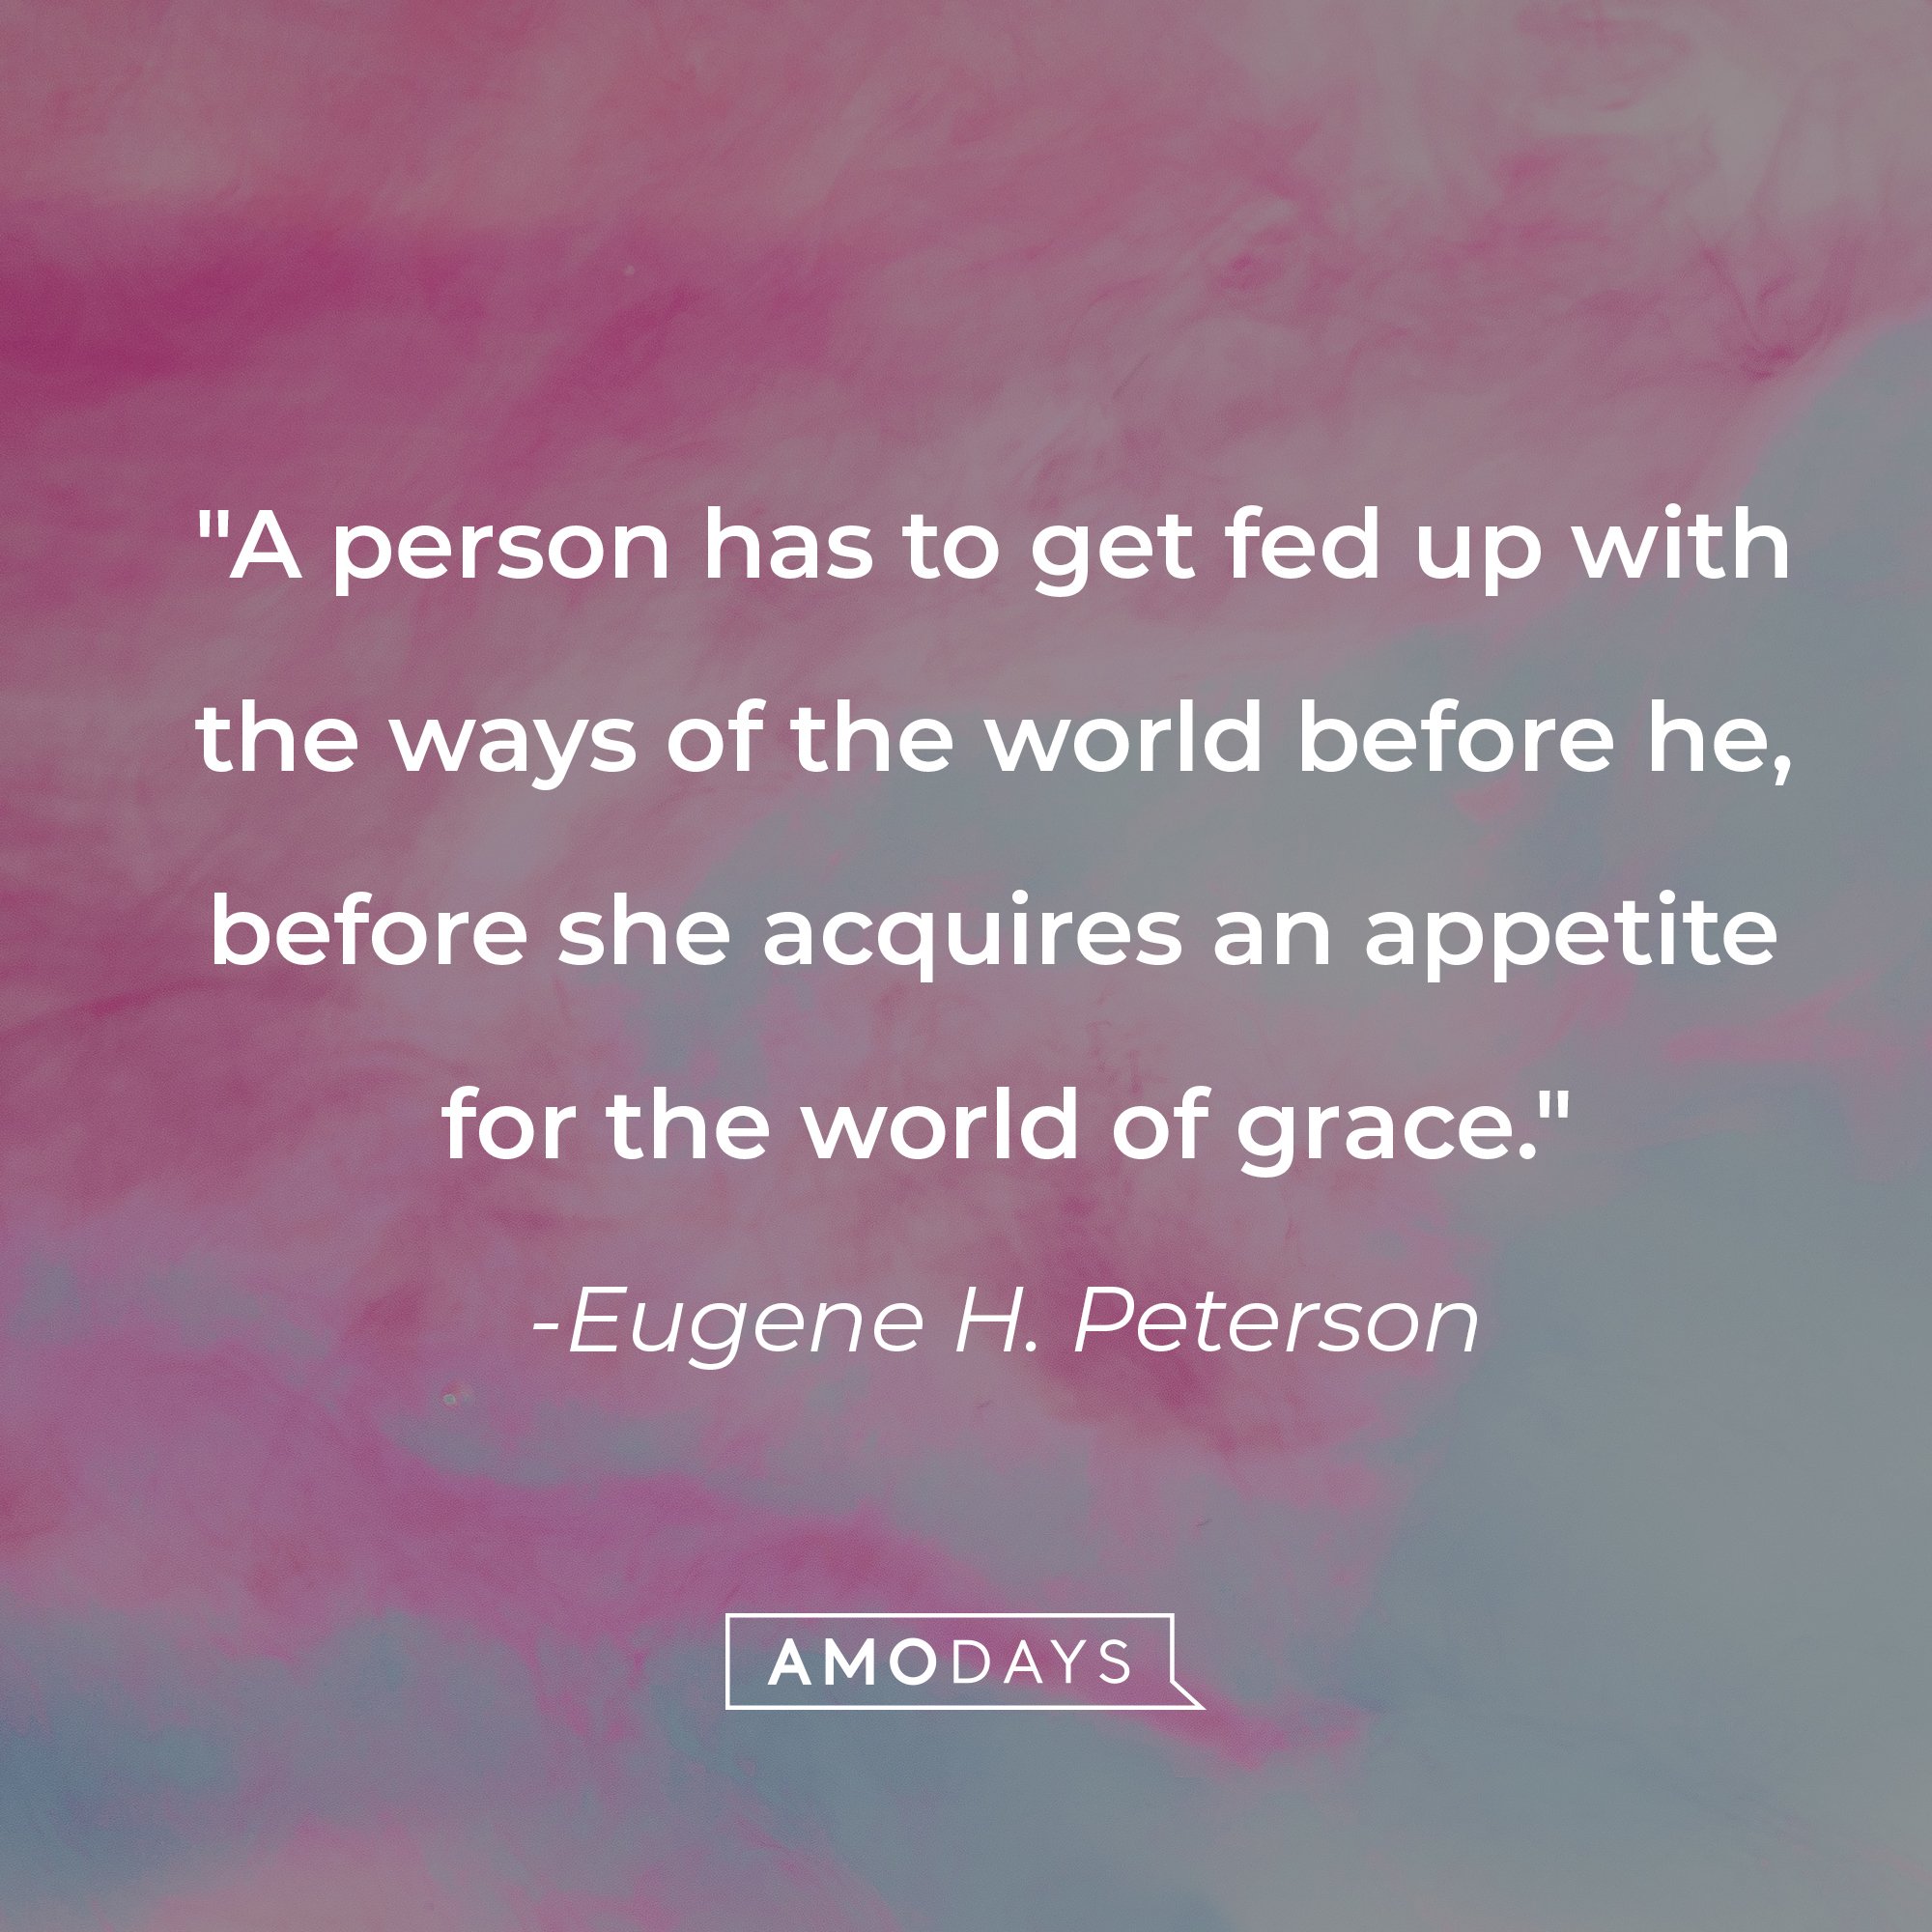 Eugene H. Peterson's quote: "A person has to get fed up with the ways of the world before he, before she acquires an appetite for the world of grace." | Source: AmoDays